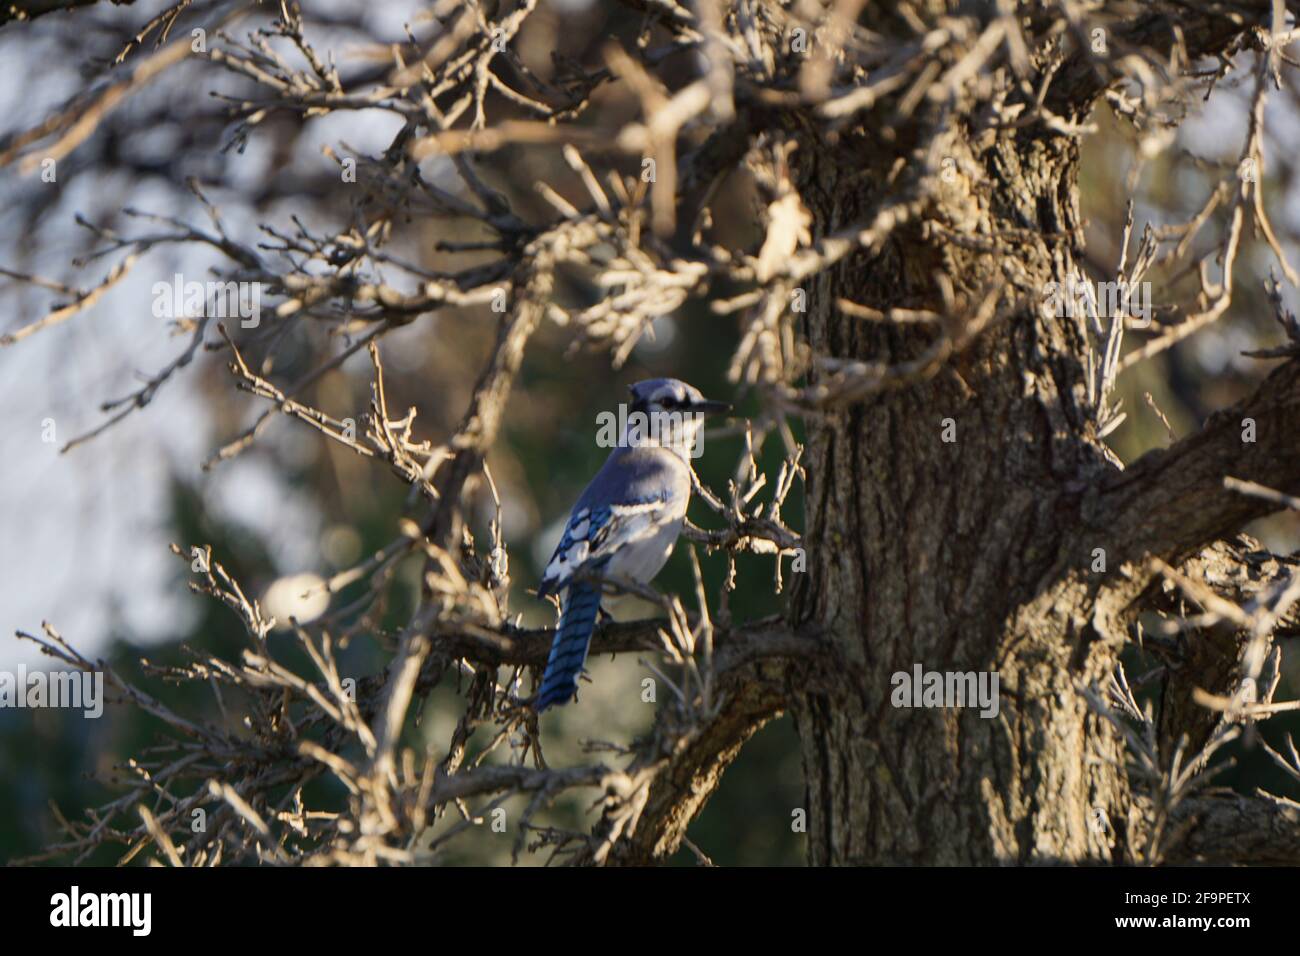 Shallow focus of a blue jay bird perched on a tree branch Stock Photo